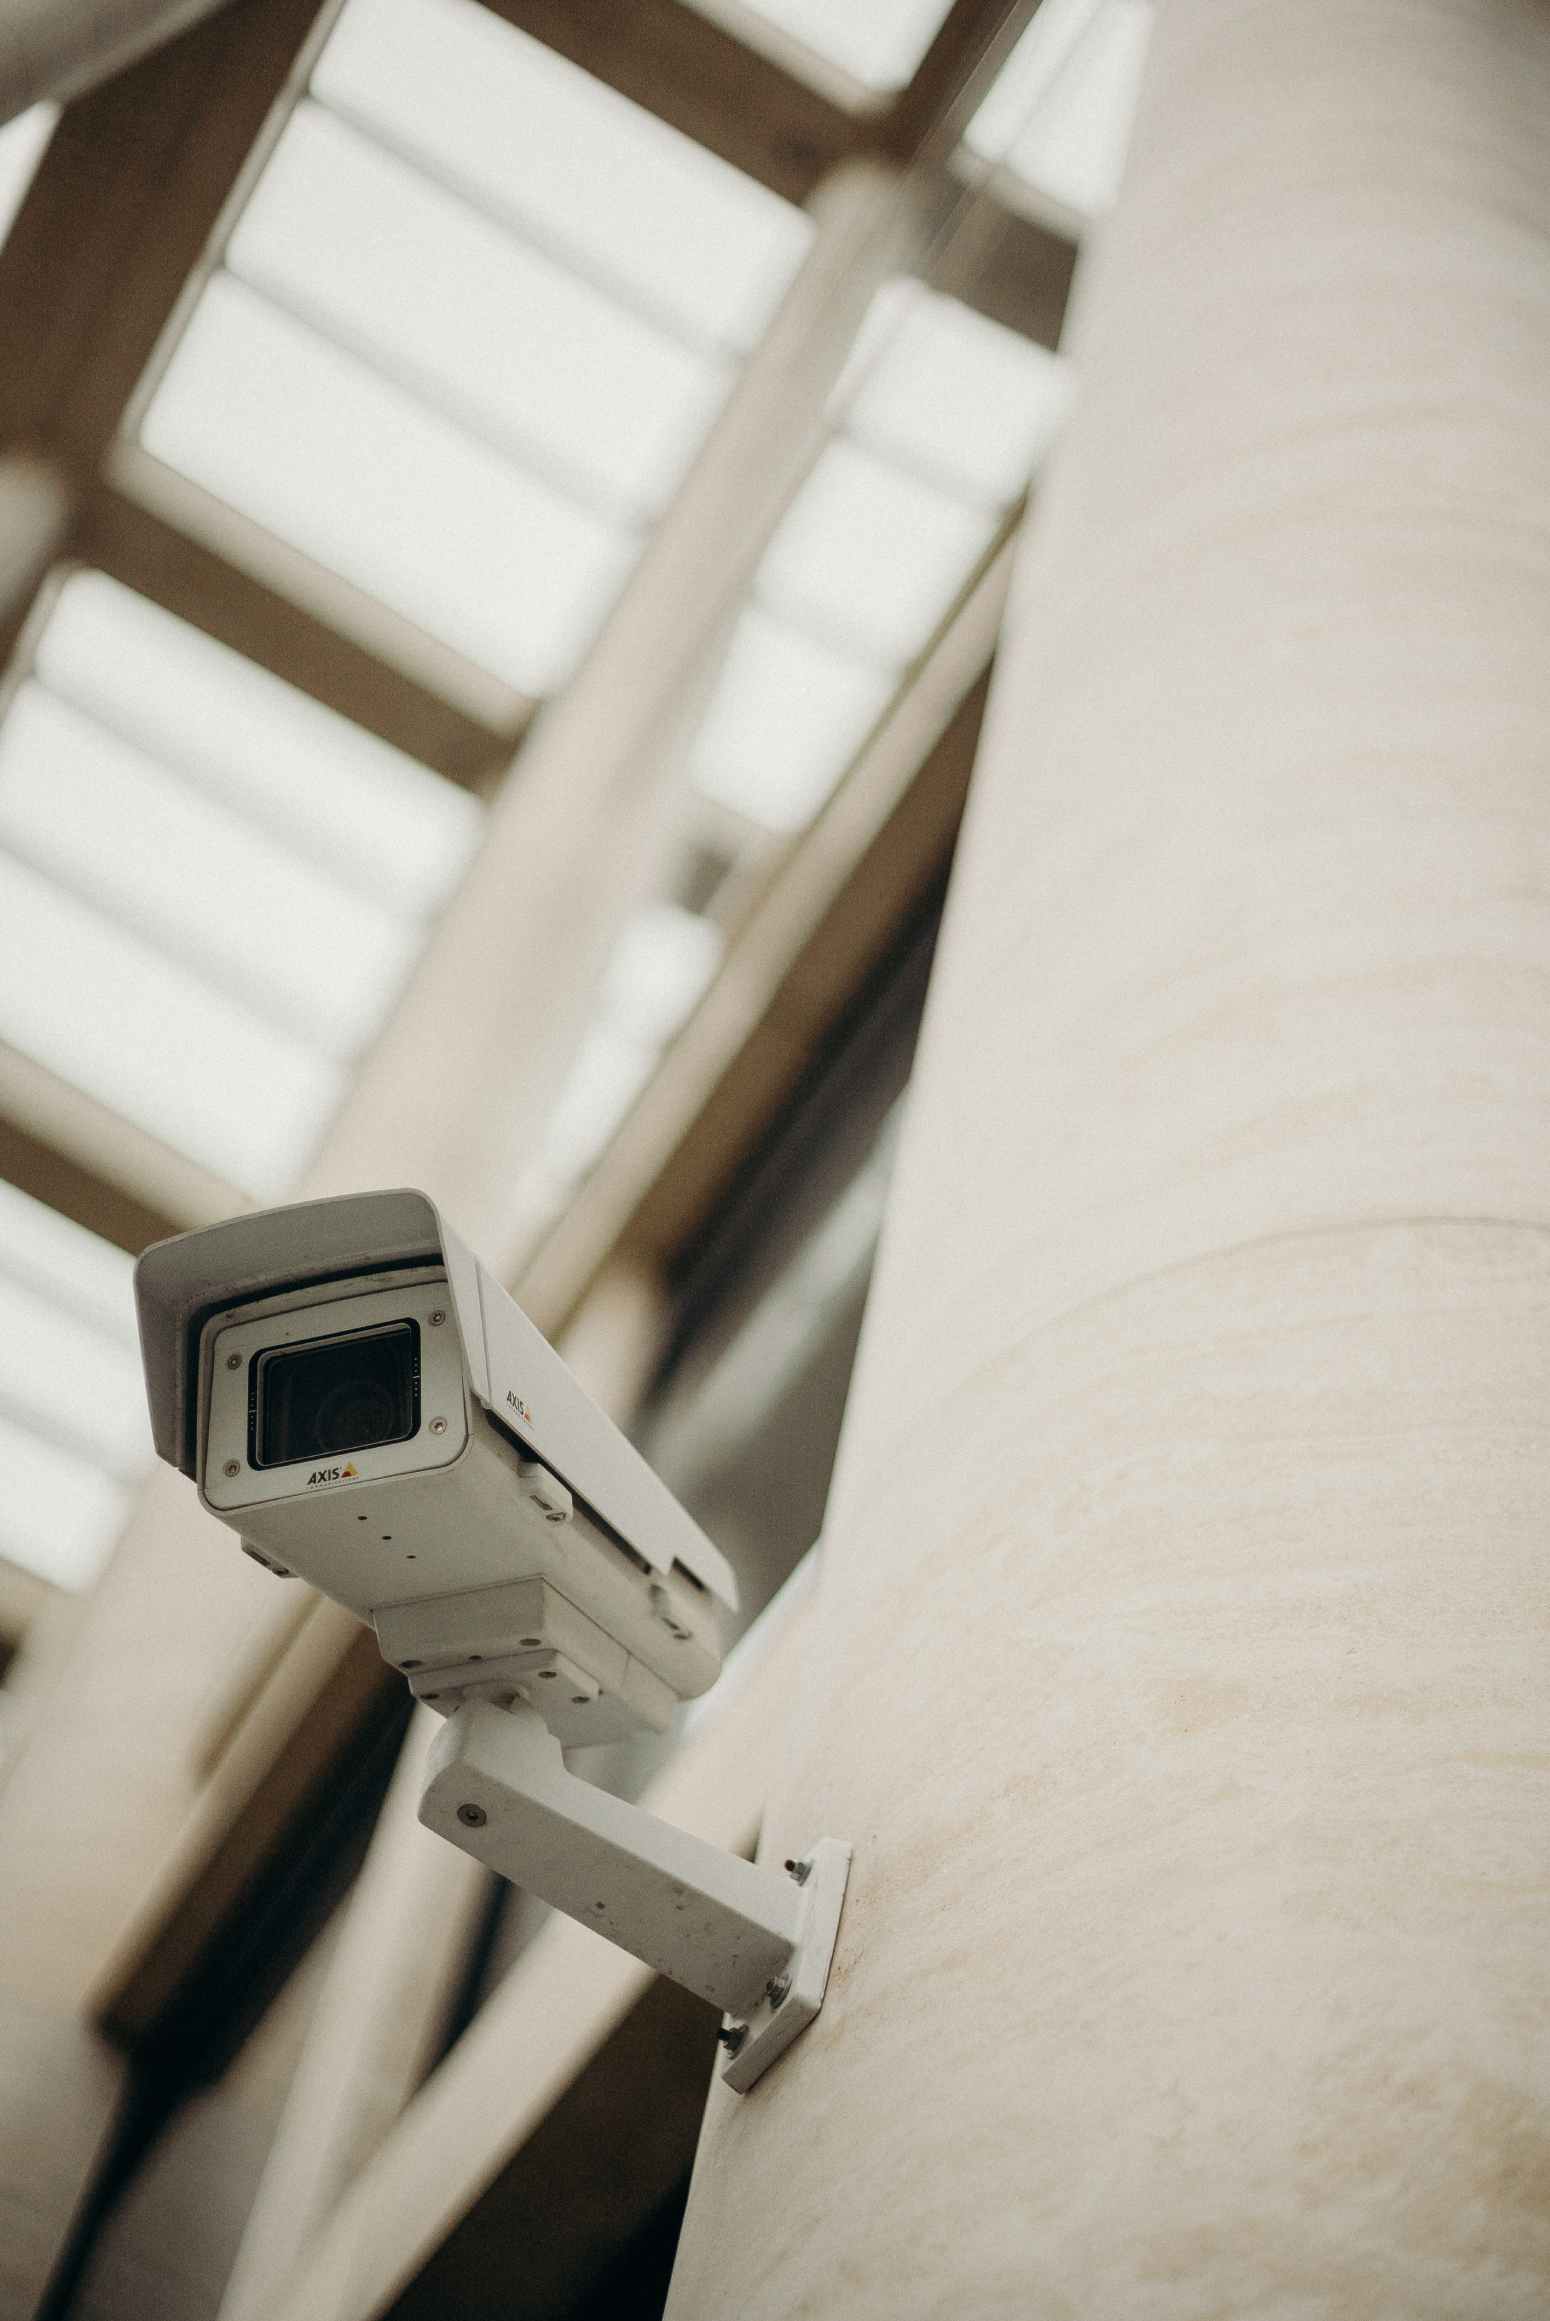 Security camera on wall